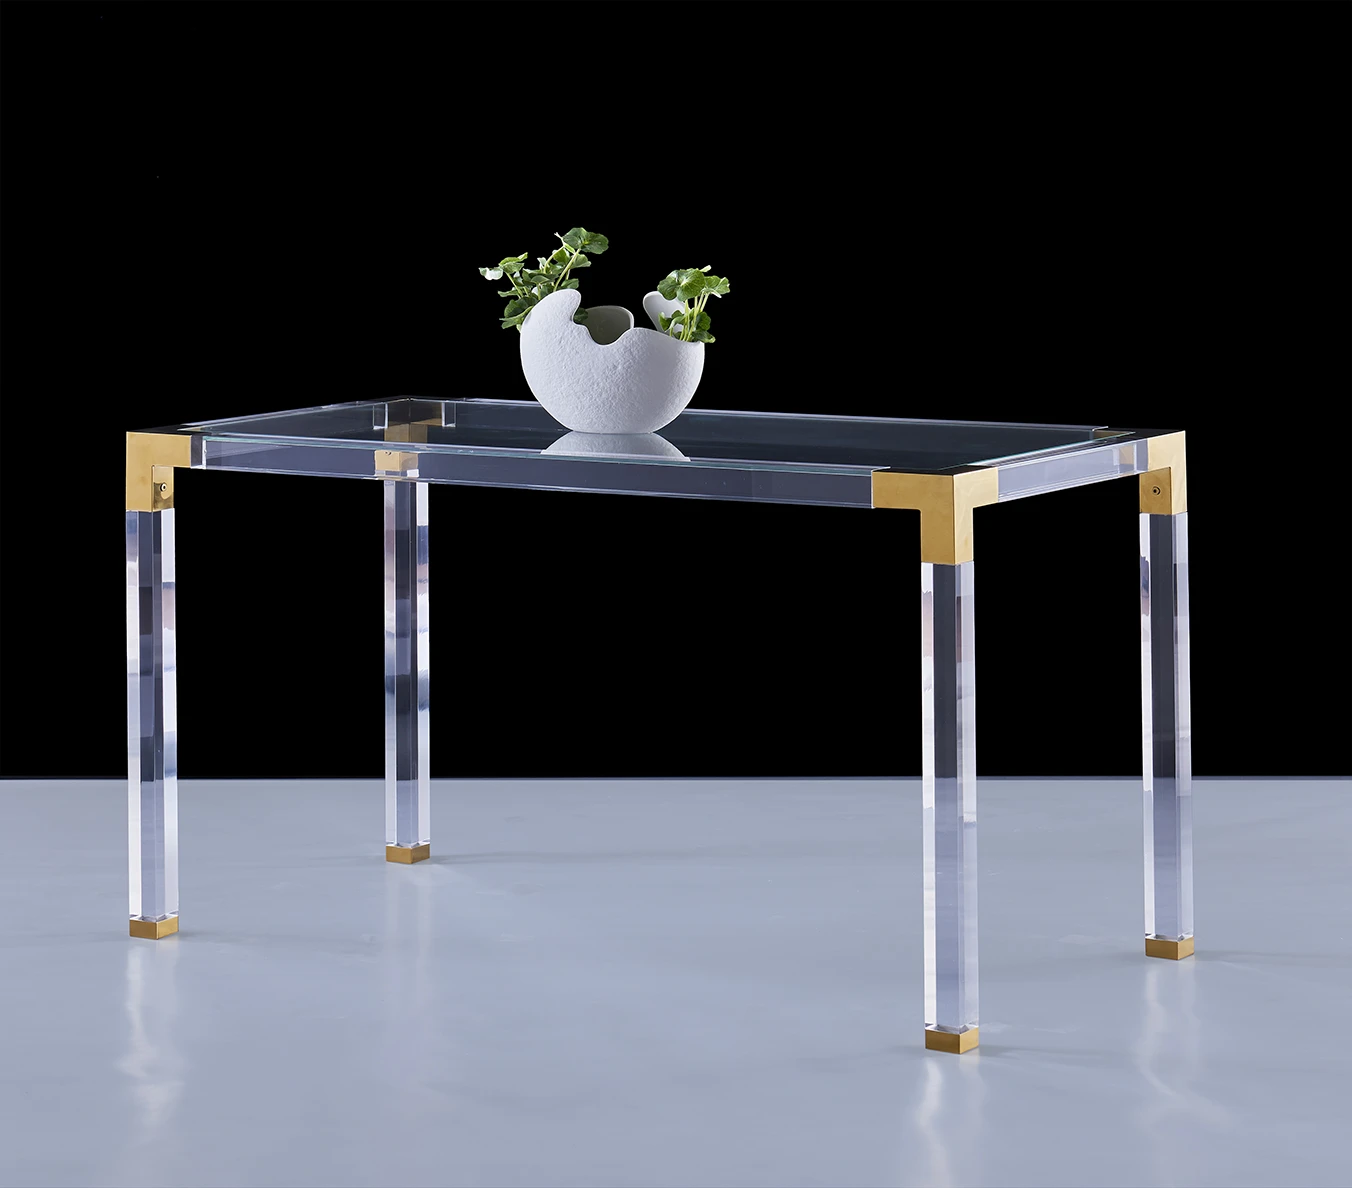 Hot sale Modern furniture stainless steel table Tee joint living room dining table with glass top